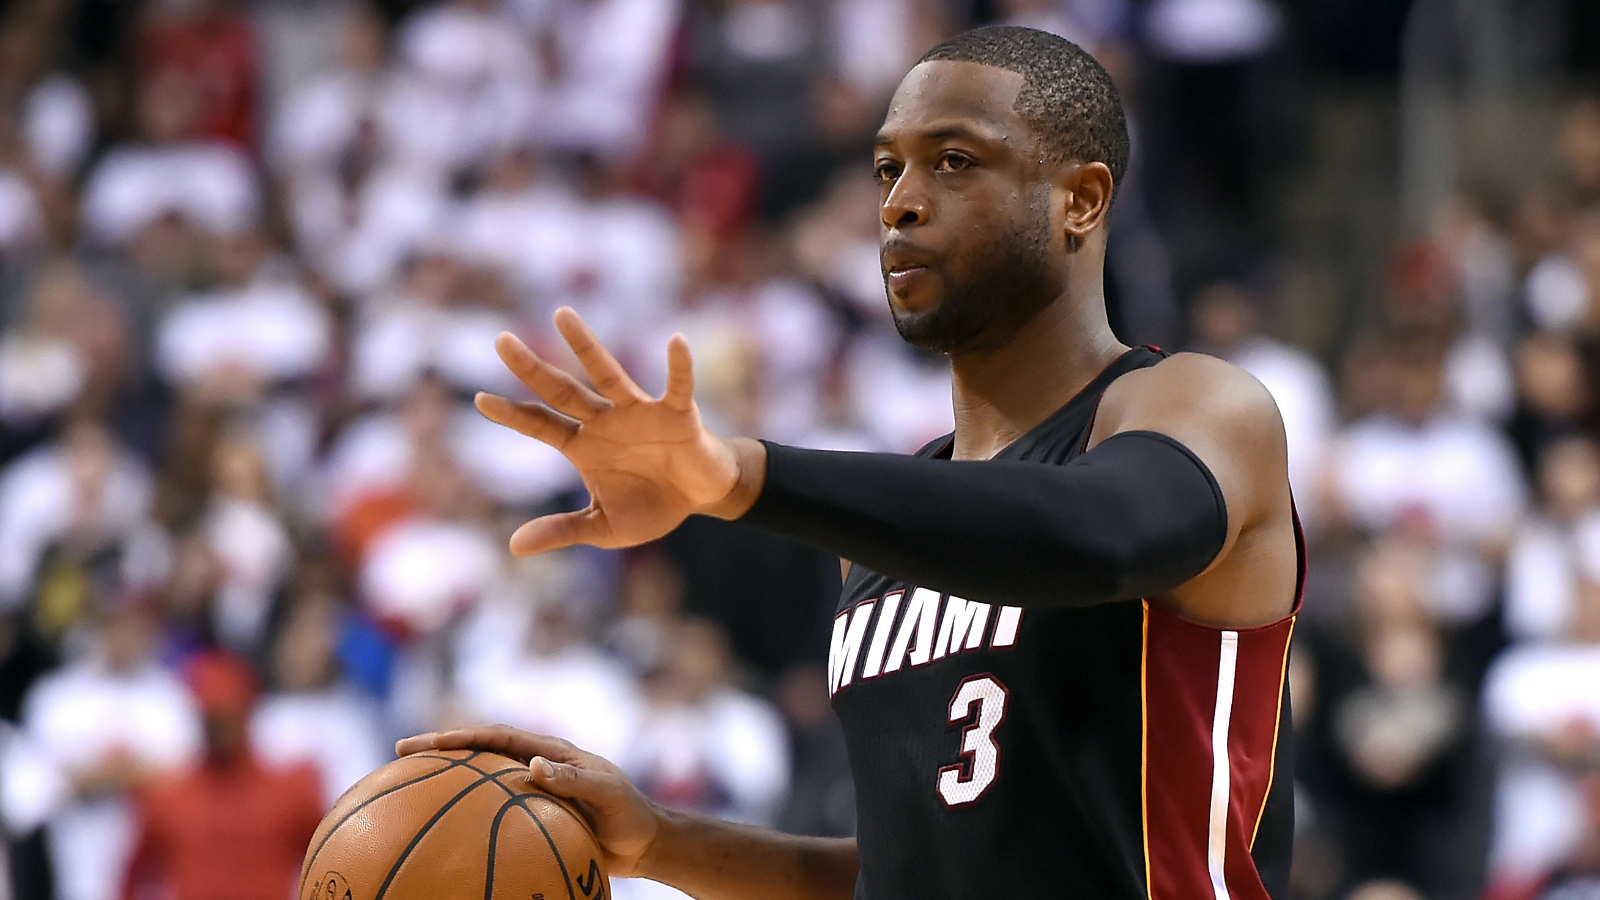 Miami Heat reuniting with Dwyane Wade after trade with Cleveland Cavaliers